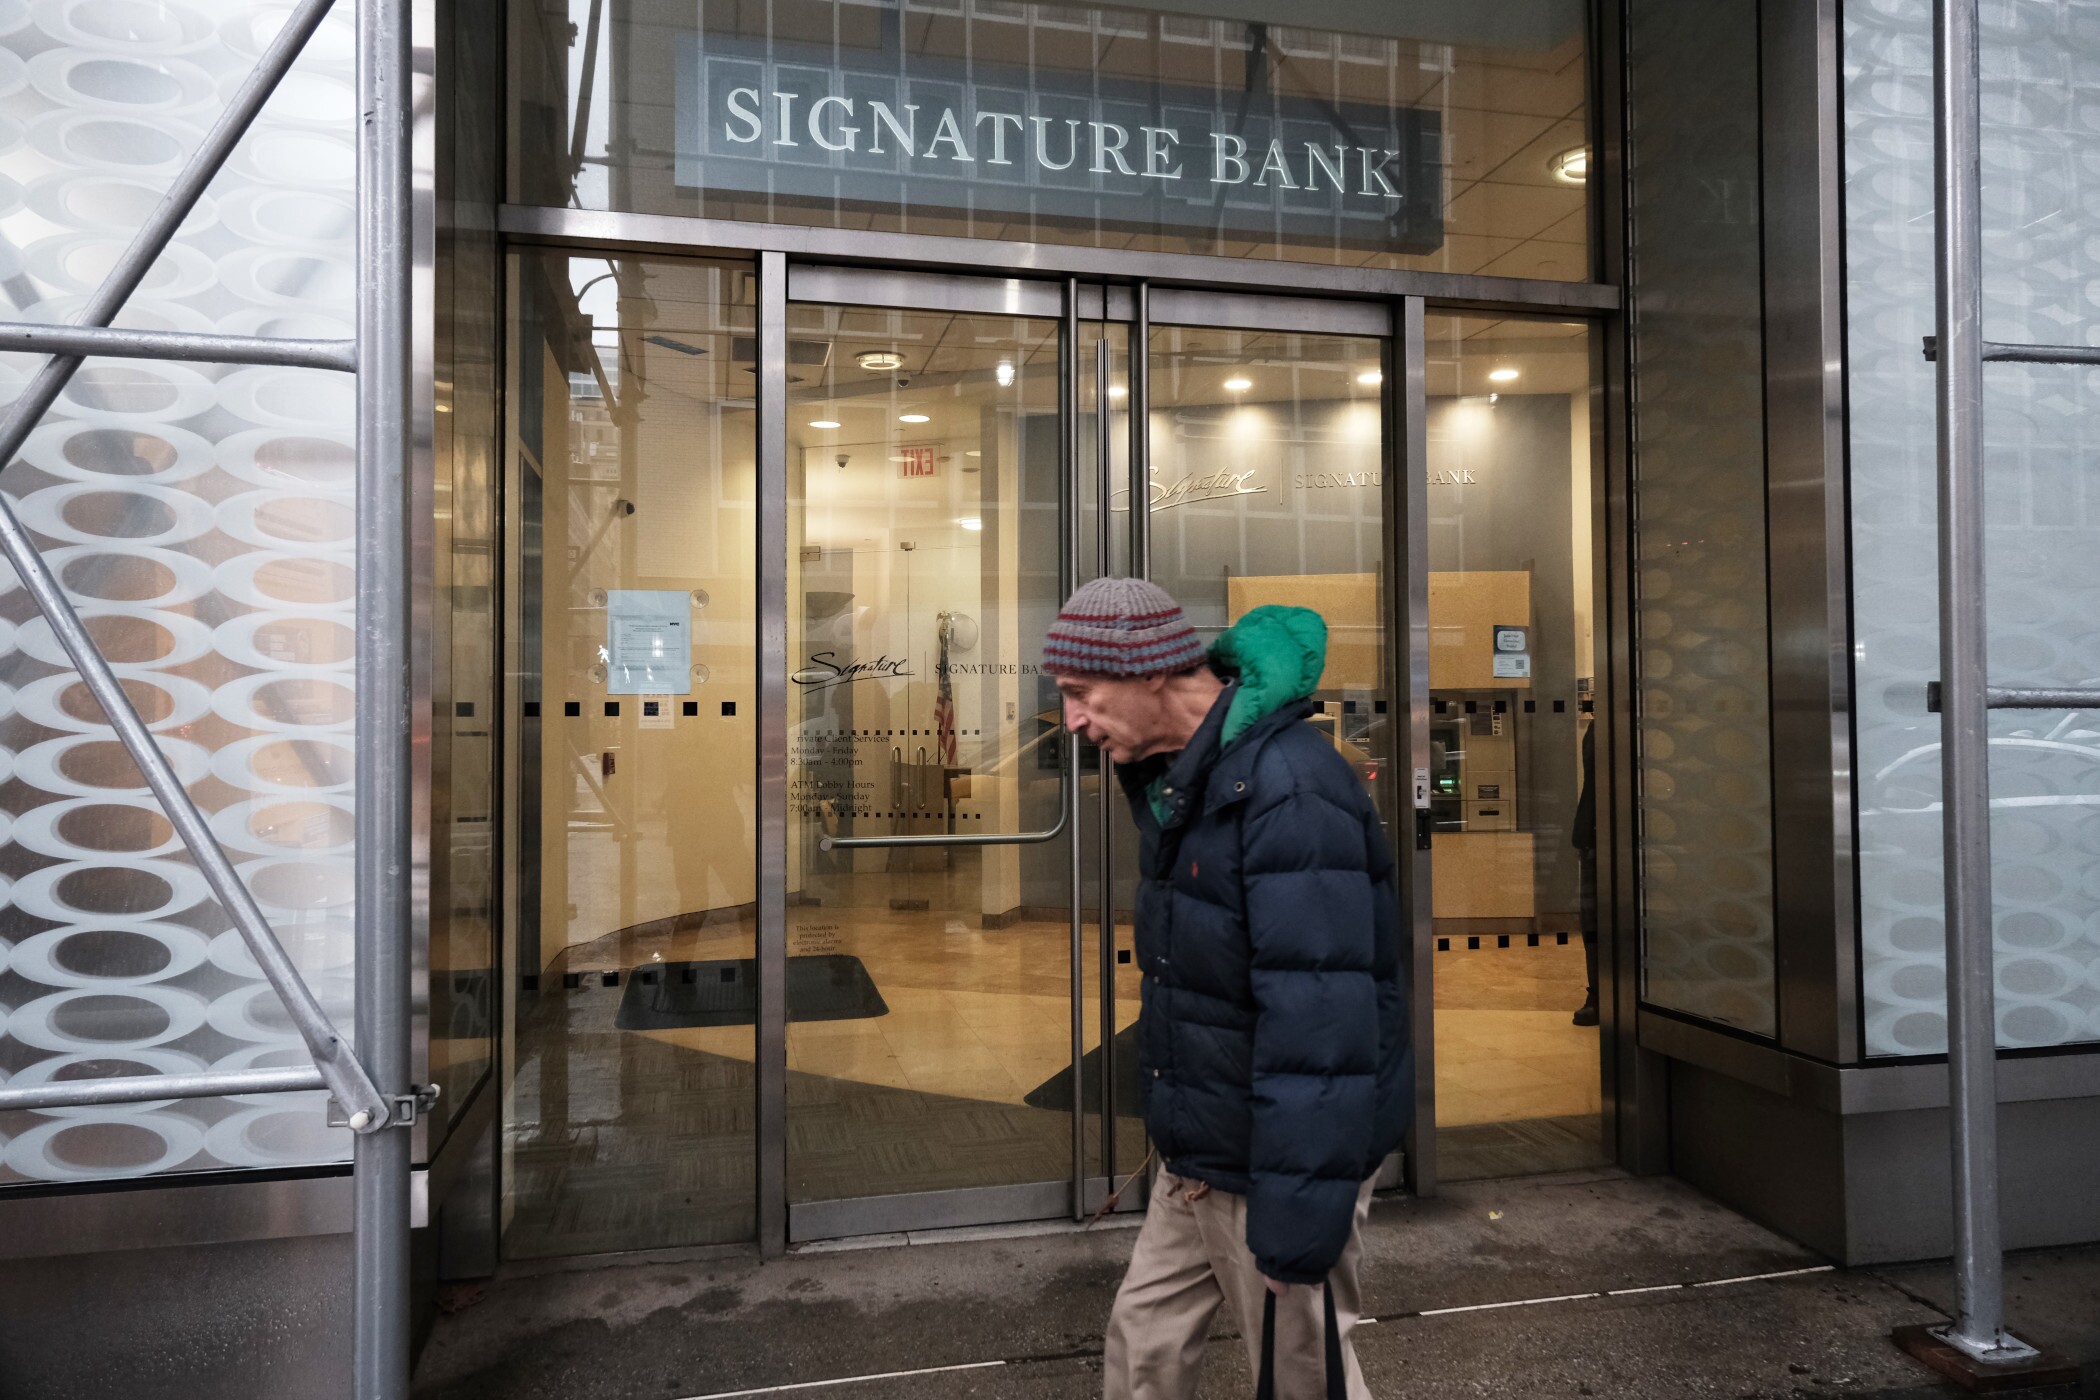 In Flagstar Bank’s deal to acquire some assets of the failed Signature Bank, it picked up 40 branches, which it plans to integrate into its own network. (Getty Images)